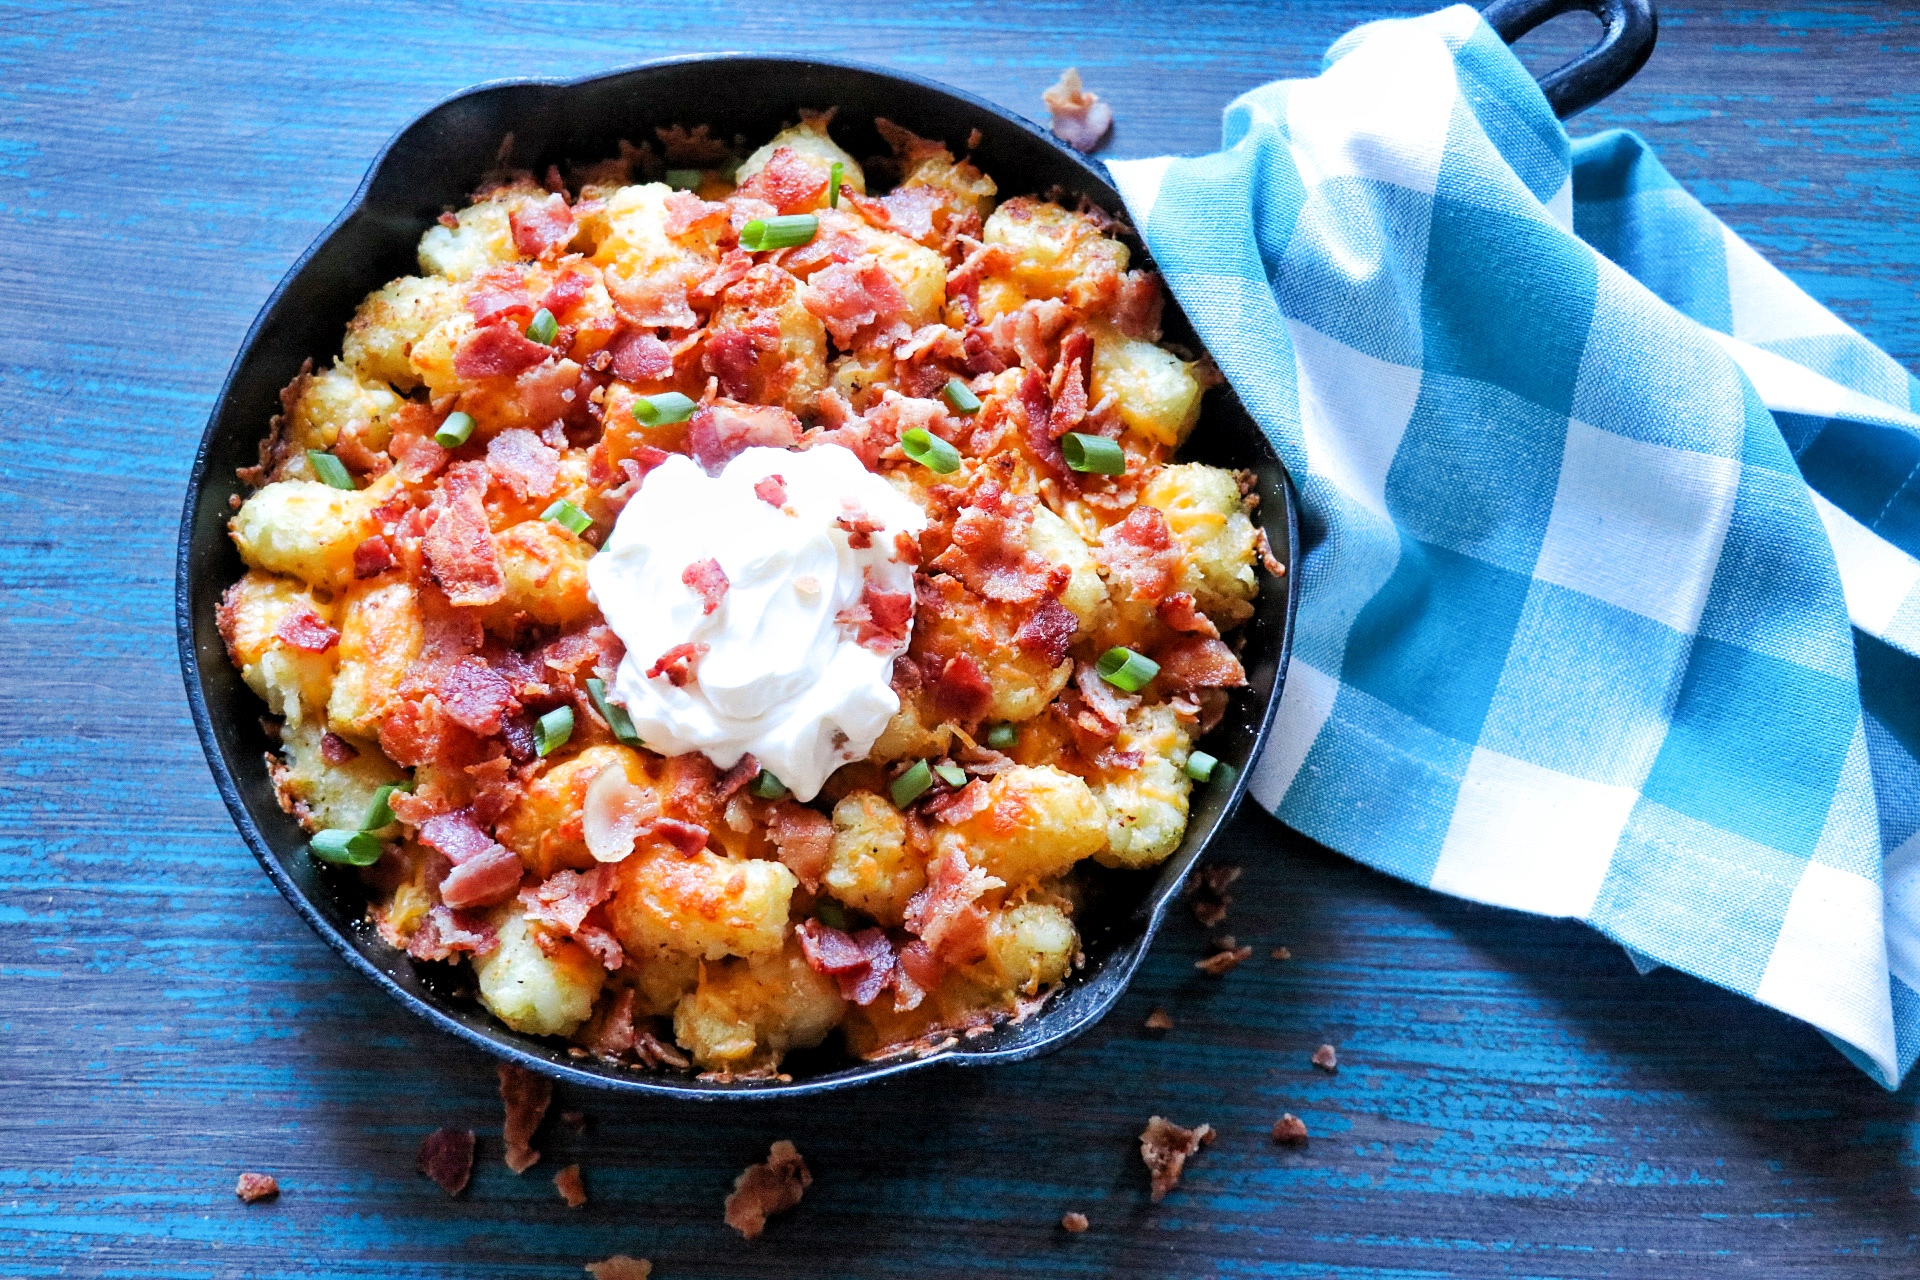 Chili Cheese Tater Tot Casserole Recipe by Jacqui Wedewer